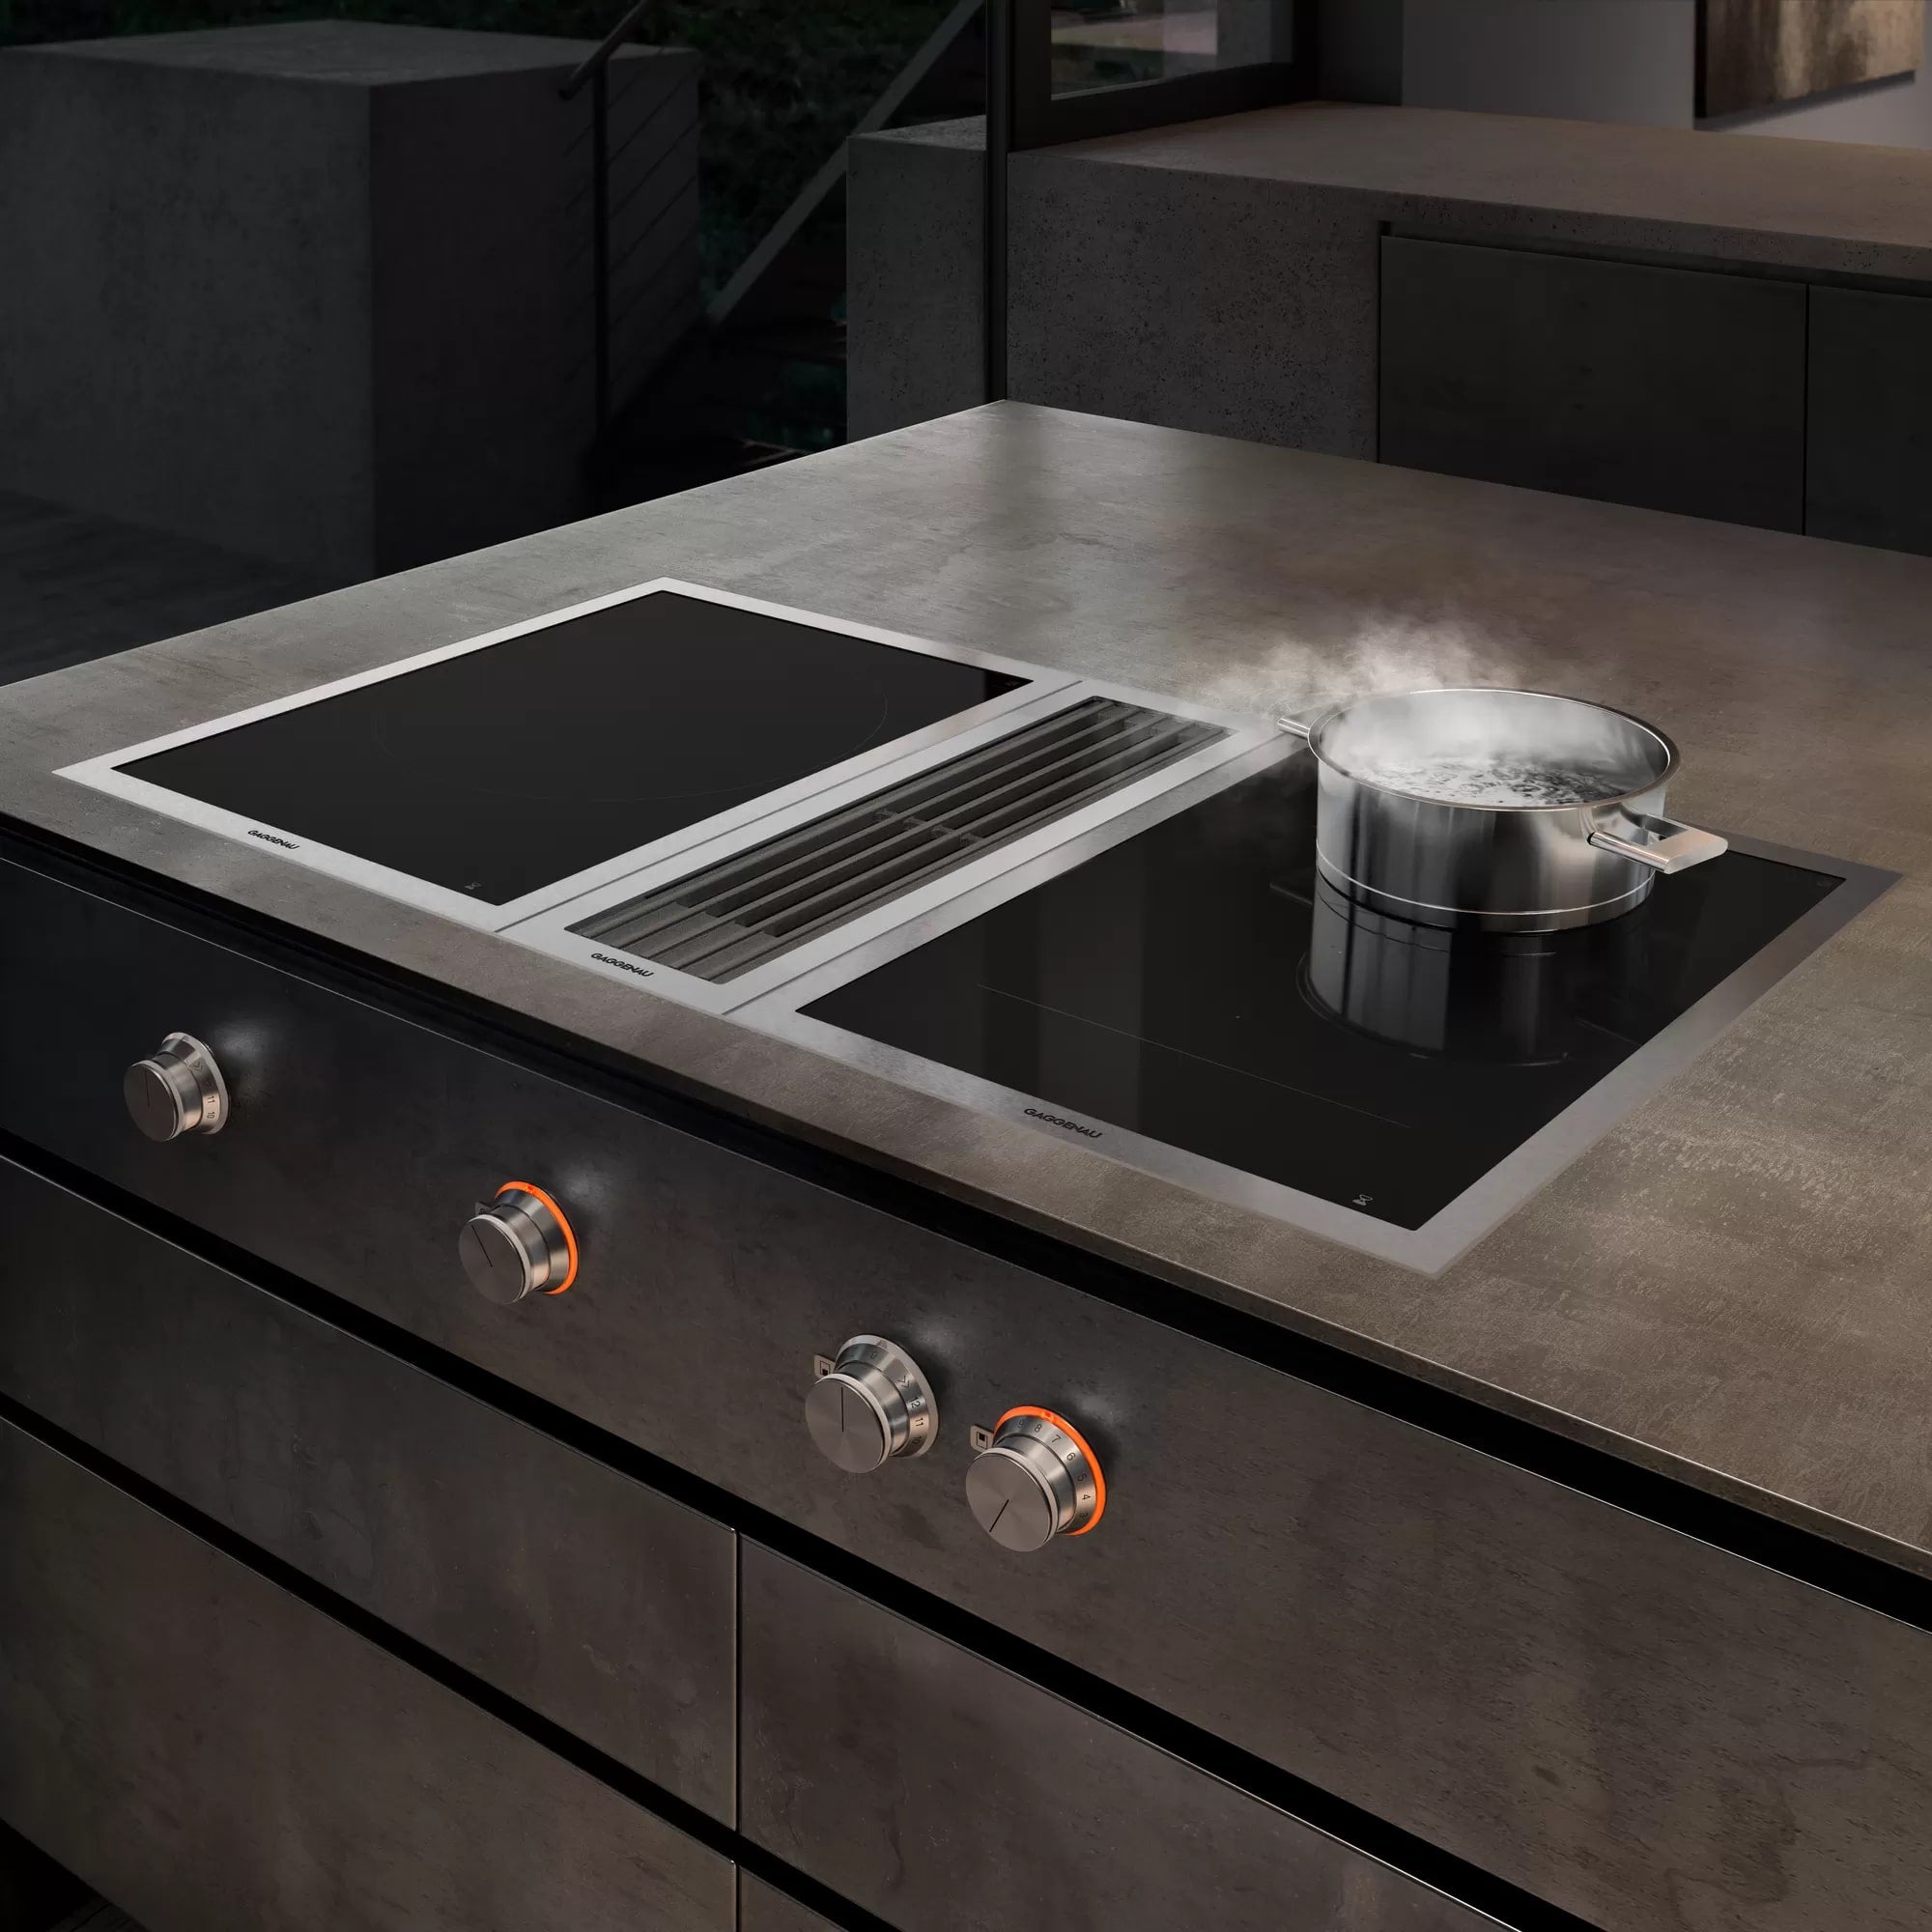 Gaggenau - 14.9375 inch wide Induction Cooktop in Stainless - VI422613